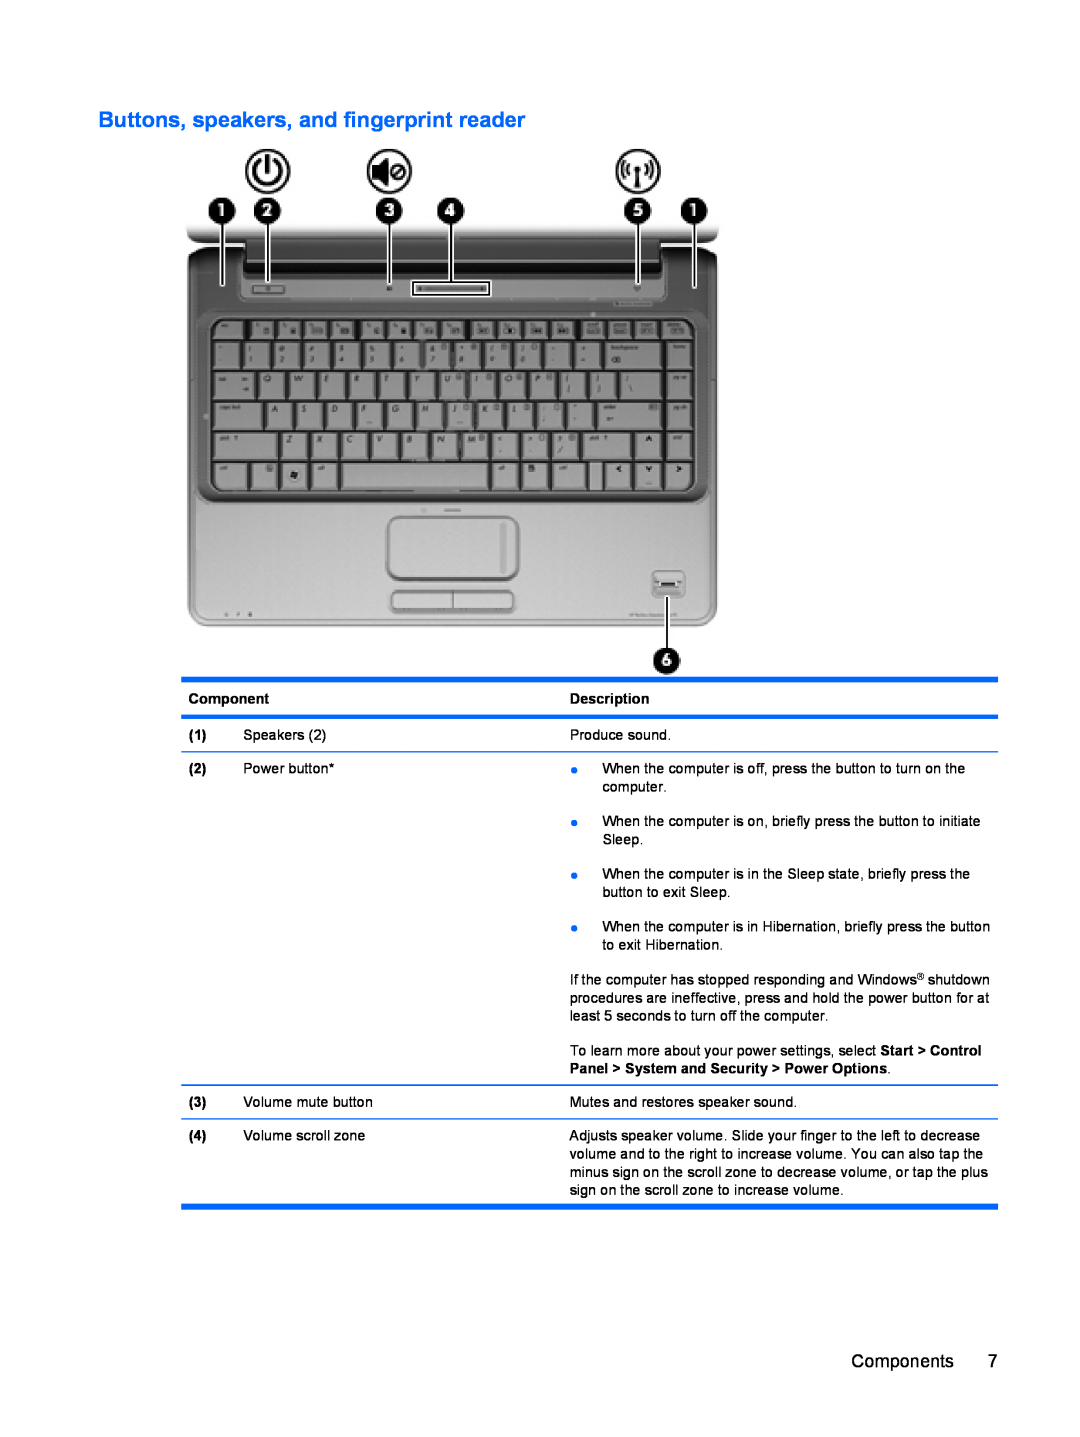 HP dv4-2160us Buttons, speakers, and fingerprint reader, Component, Description, Panel System and Security Power Options 